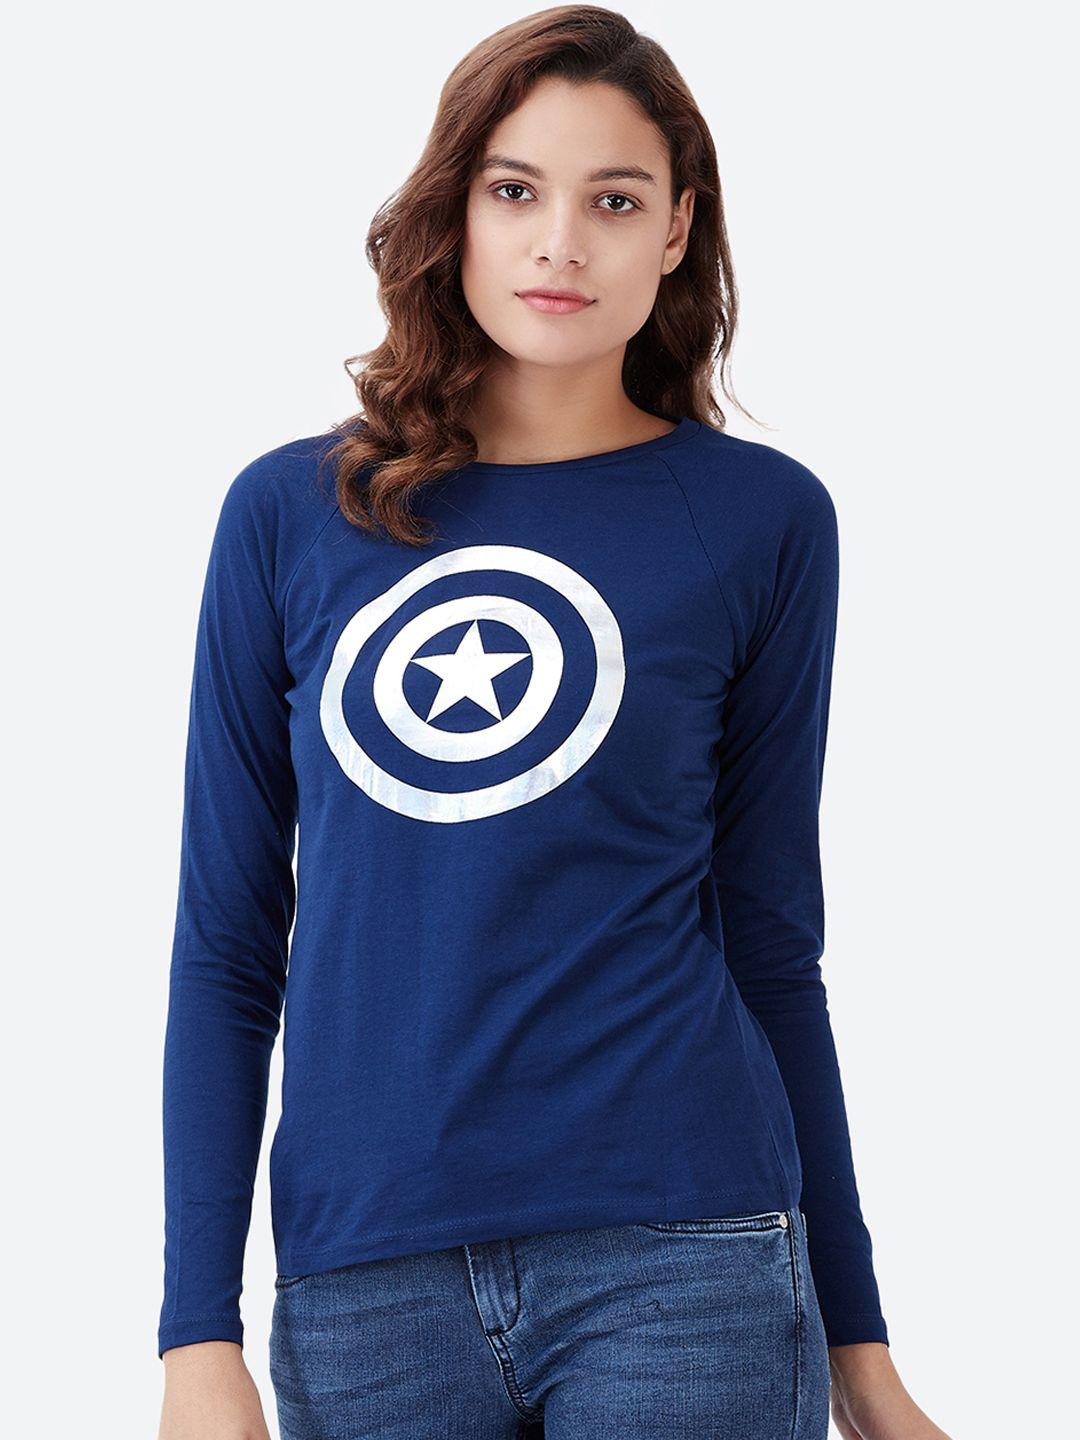 free authority captain america featured navy tshirt for women